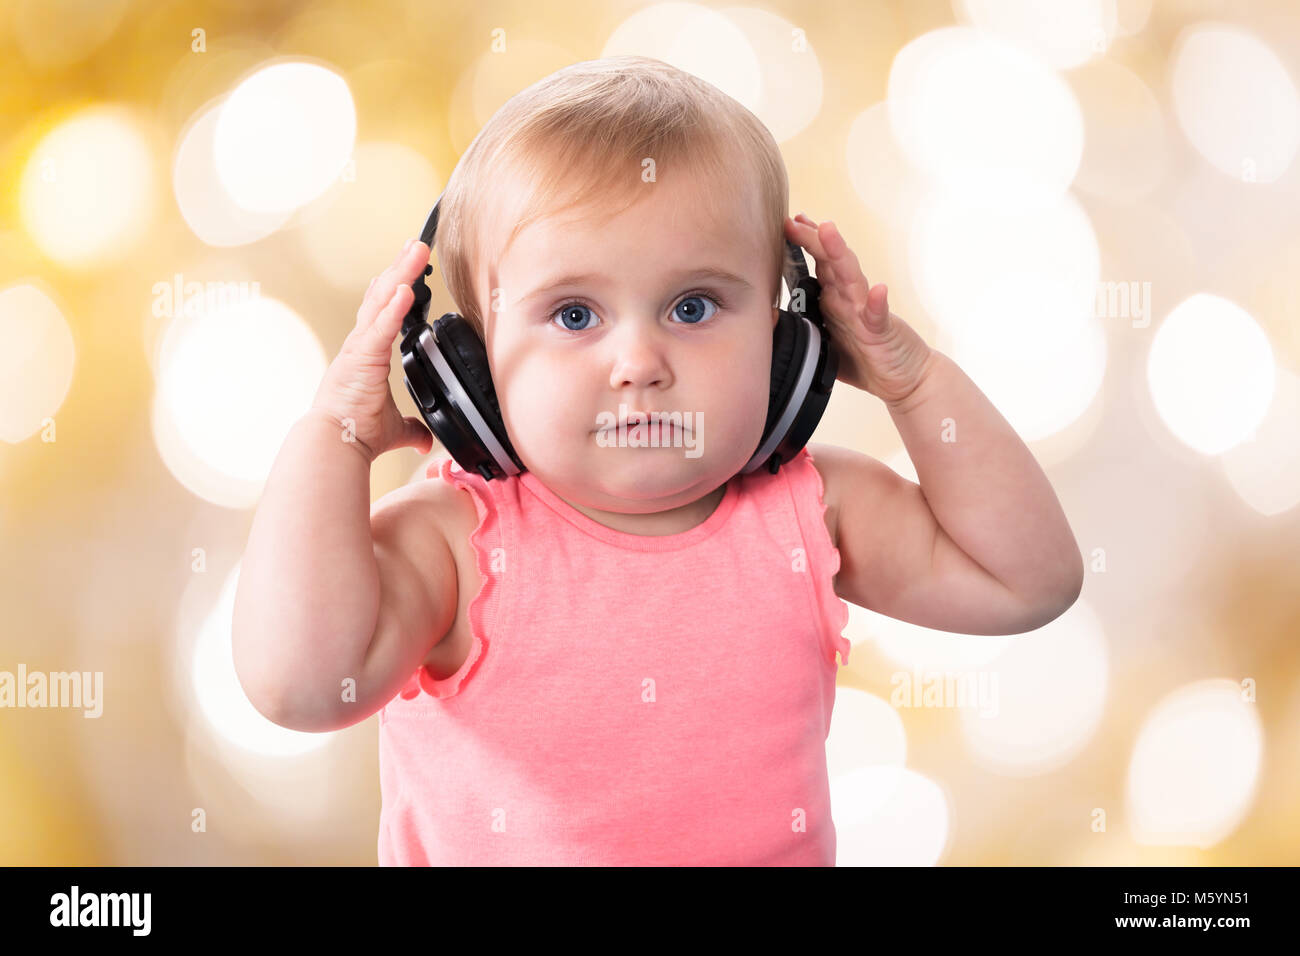 Portrait Of A Cute Baby Girl With Headphone Stock Photo